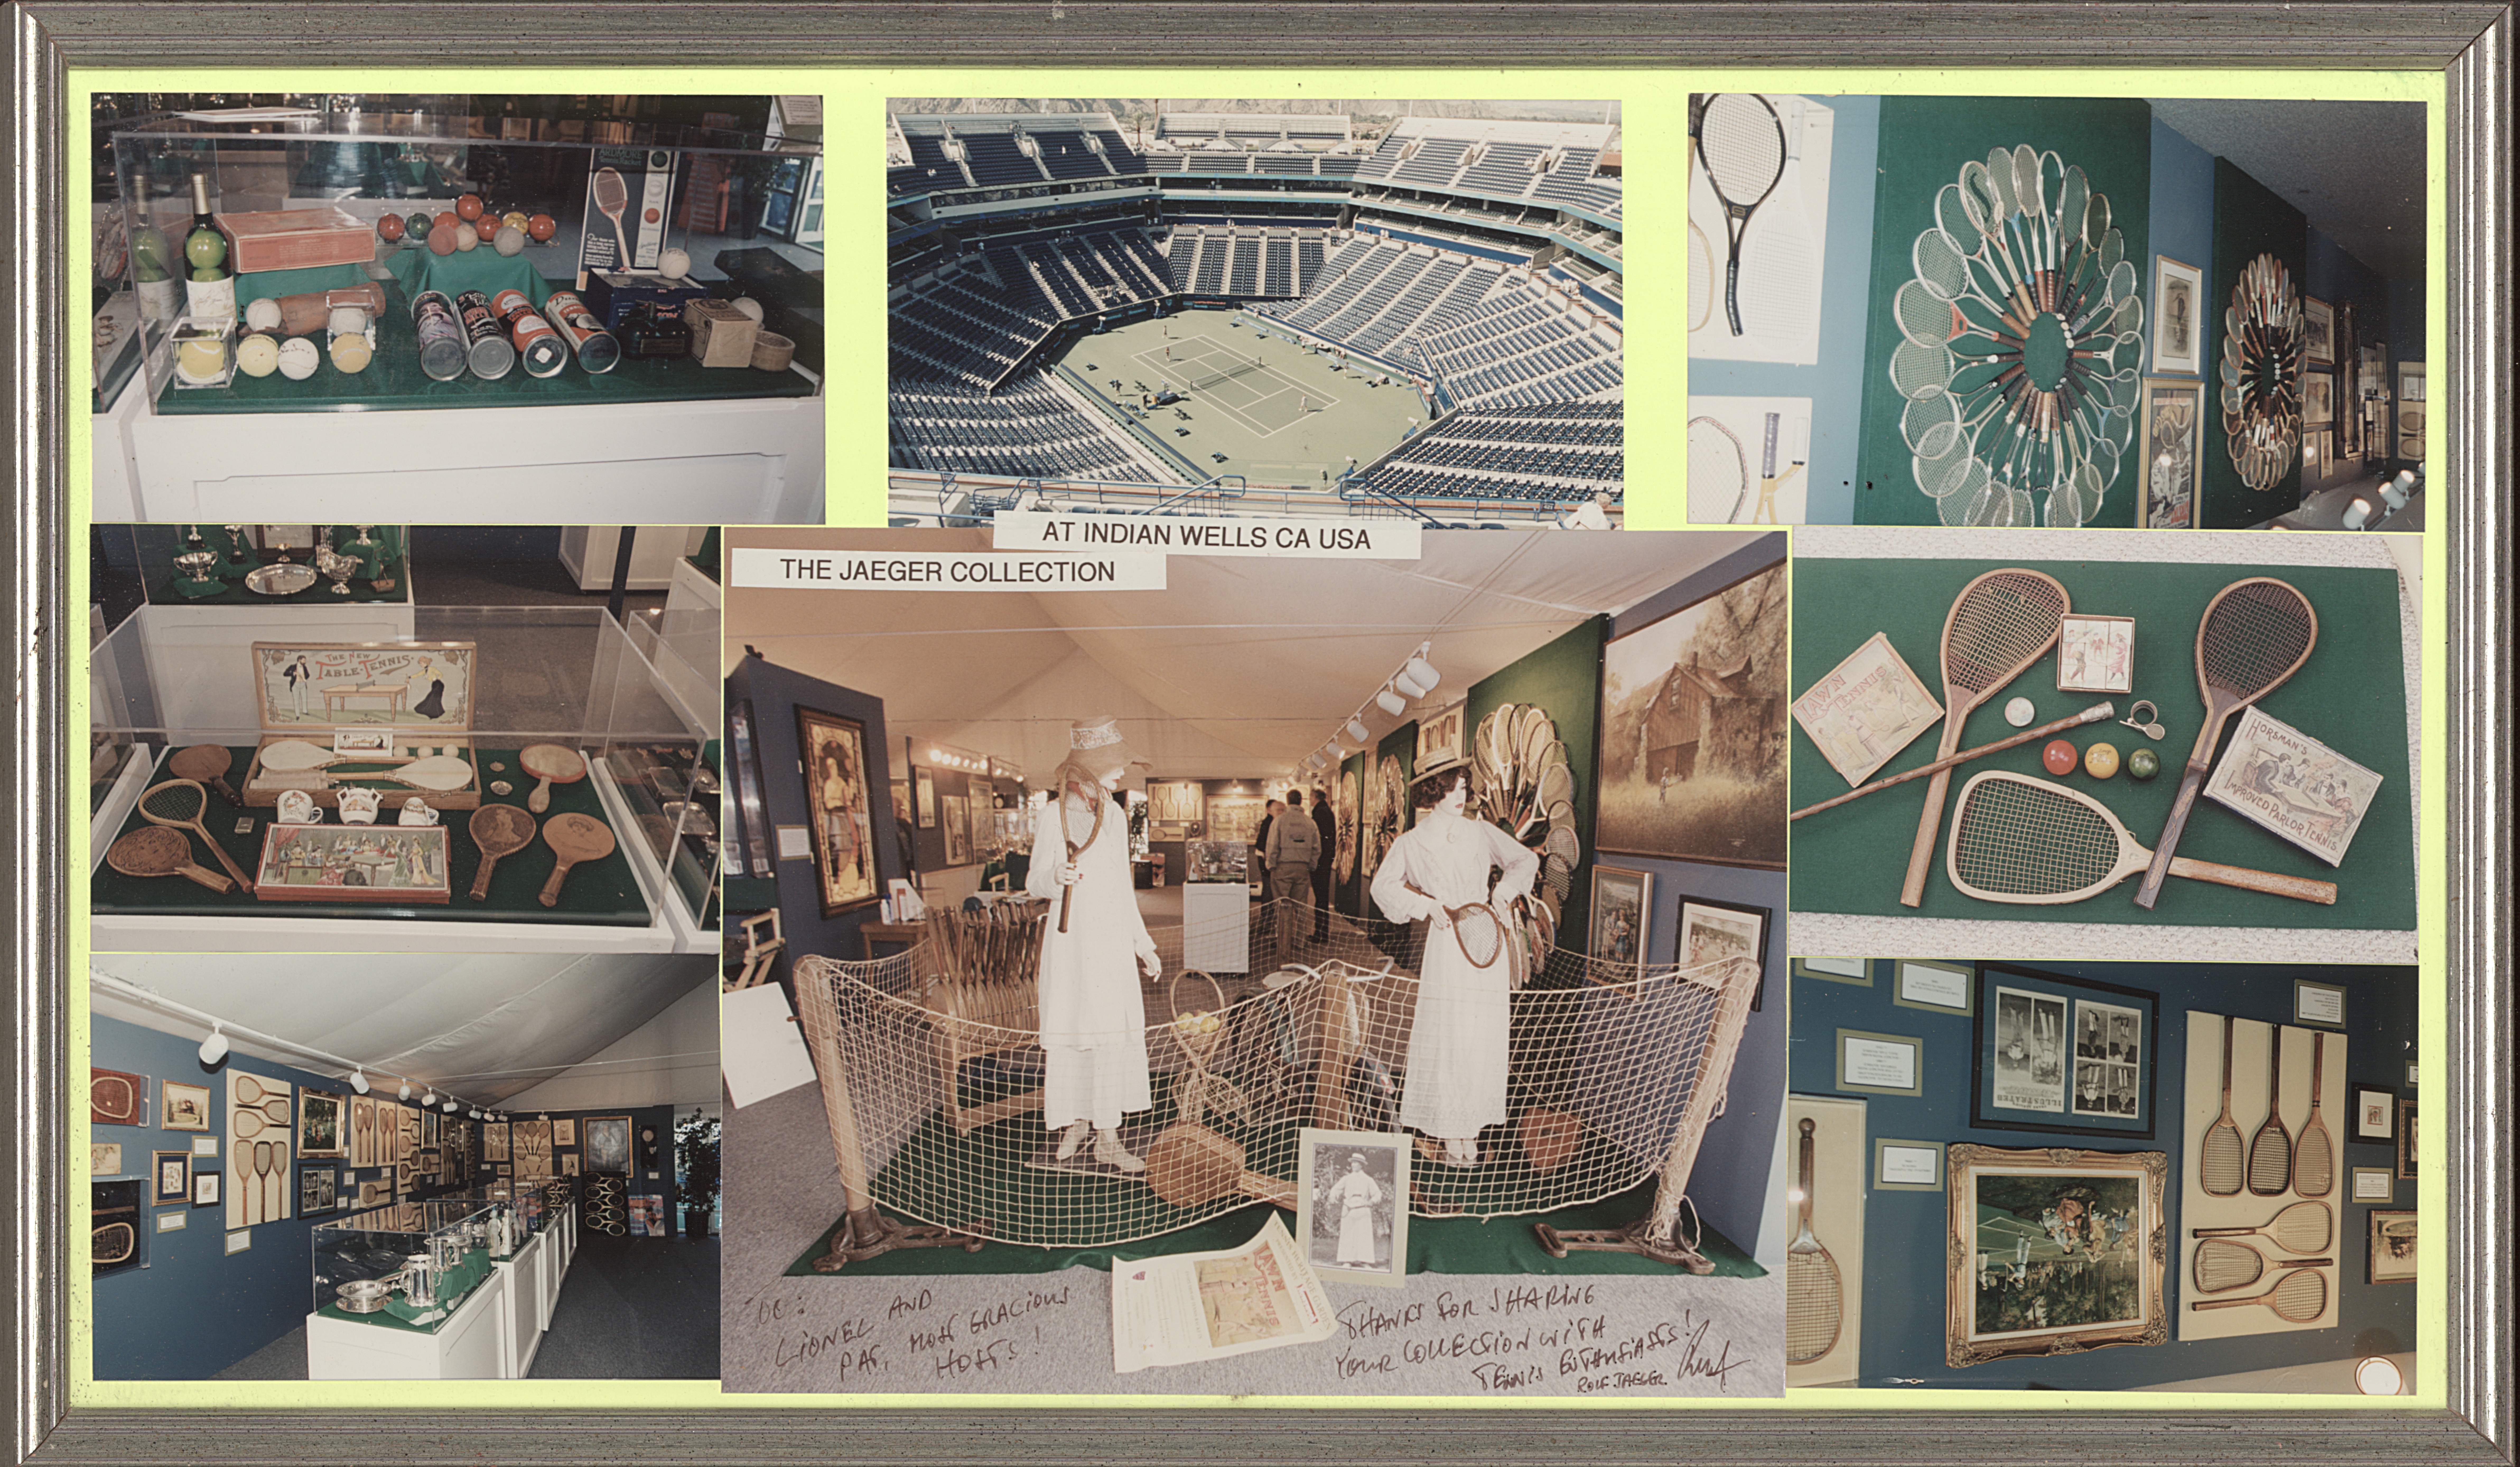 The Jaeger Collection, Collage of Tennis Collection at Indian Wells CA, USA.